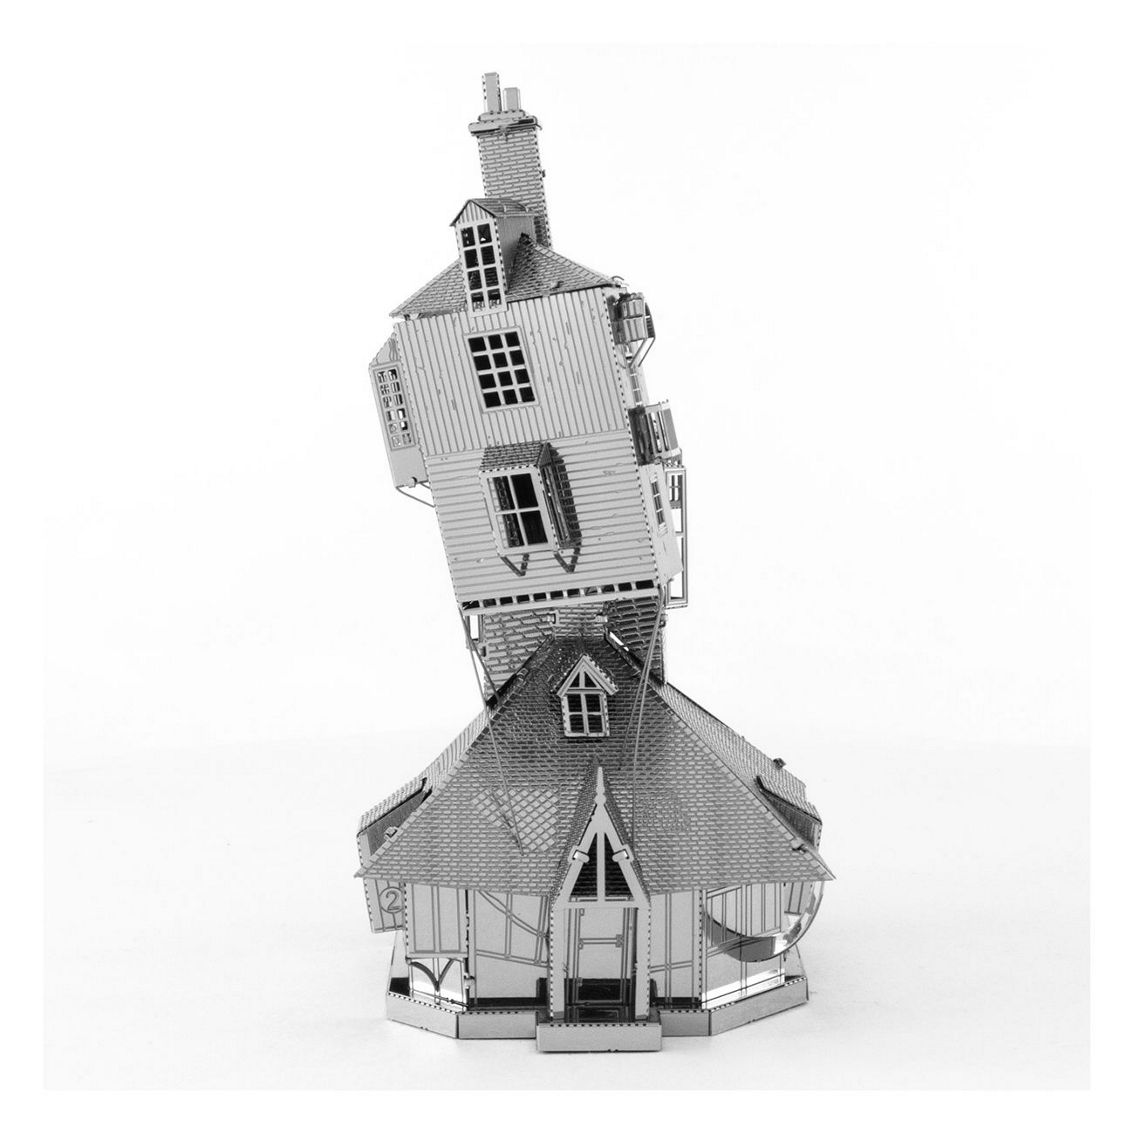 Fascinations Metal Earth 3D Model Kit - Harry Potter The Burrow Weasley Family Home - Image 5 of 5